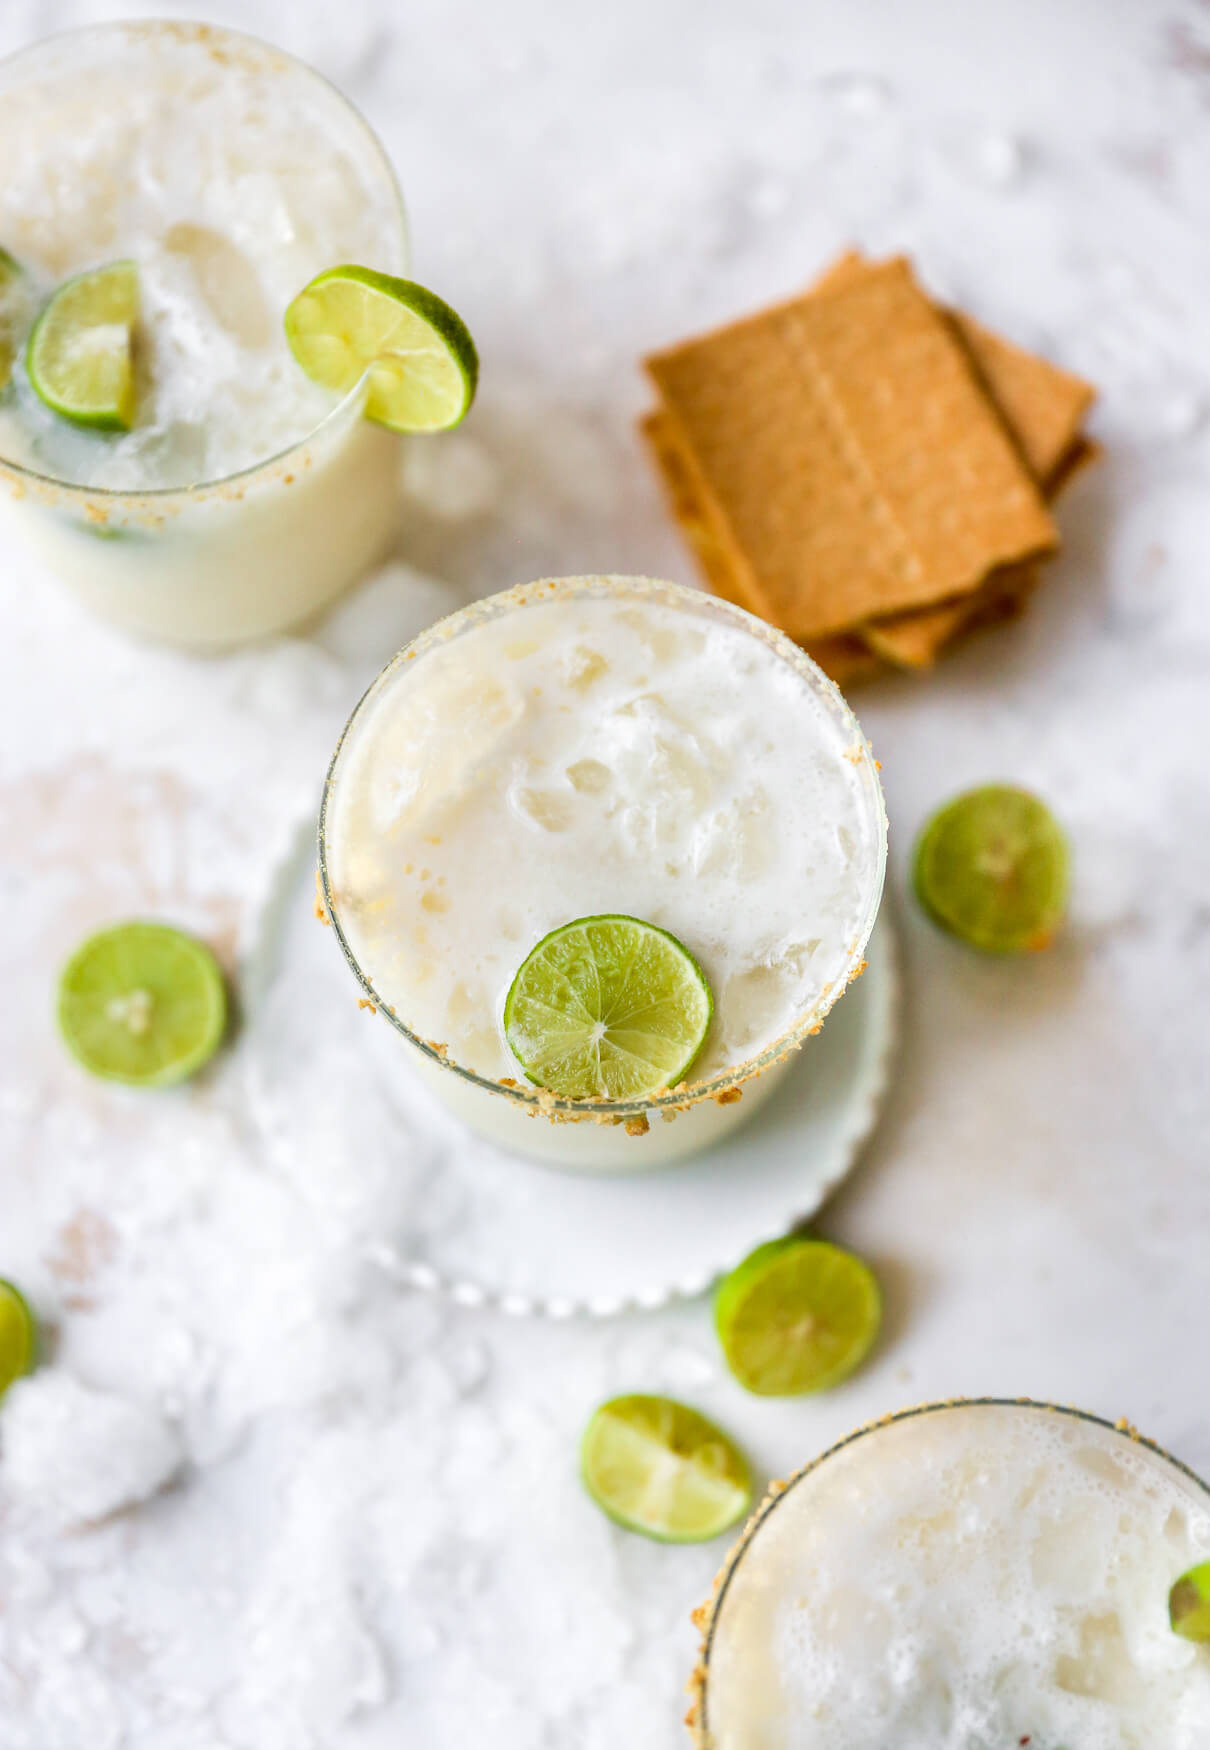 Margaritas garnished with line and graham cracker crumbs.